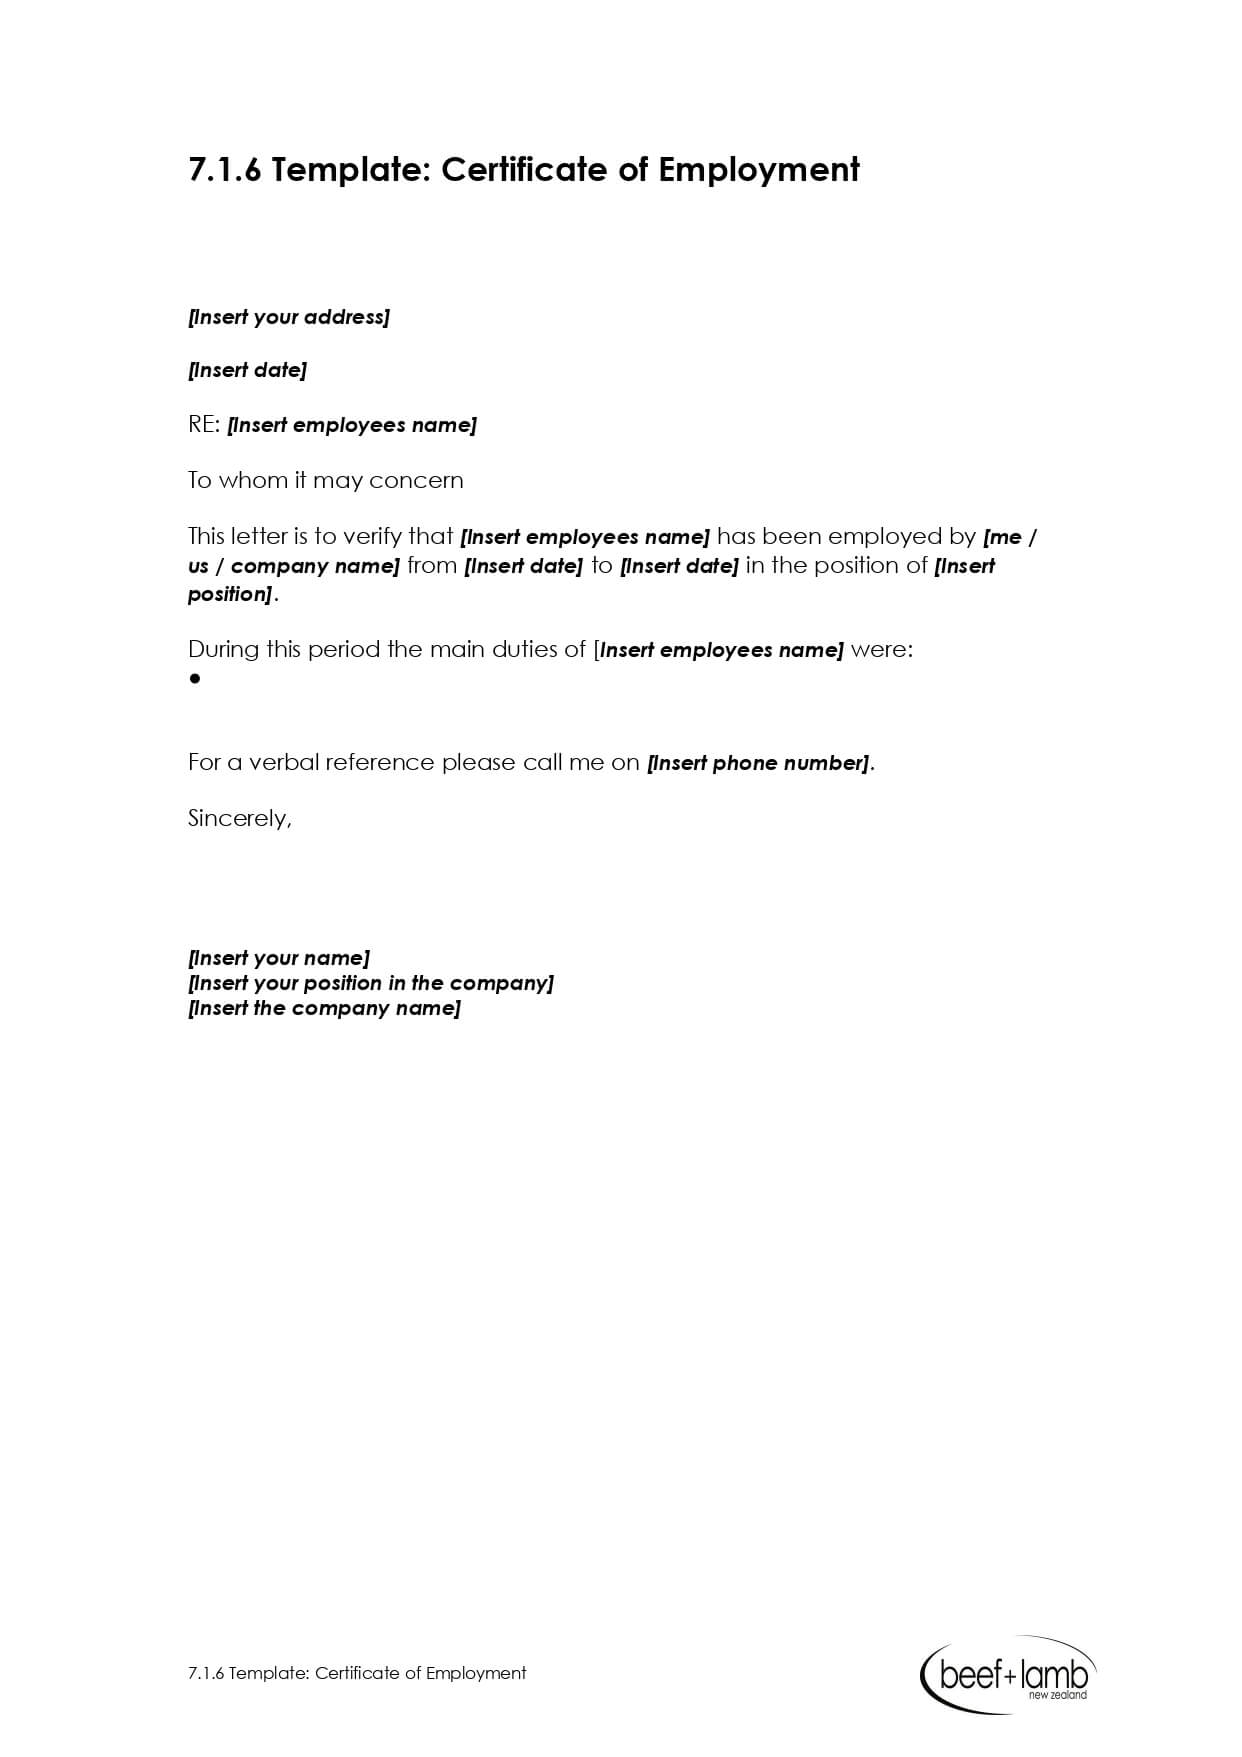 Editable Certificate Of Employment Template - Google Docs Intended For Certificate Of Employment Template